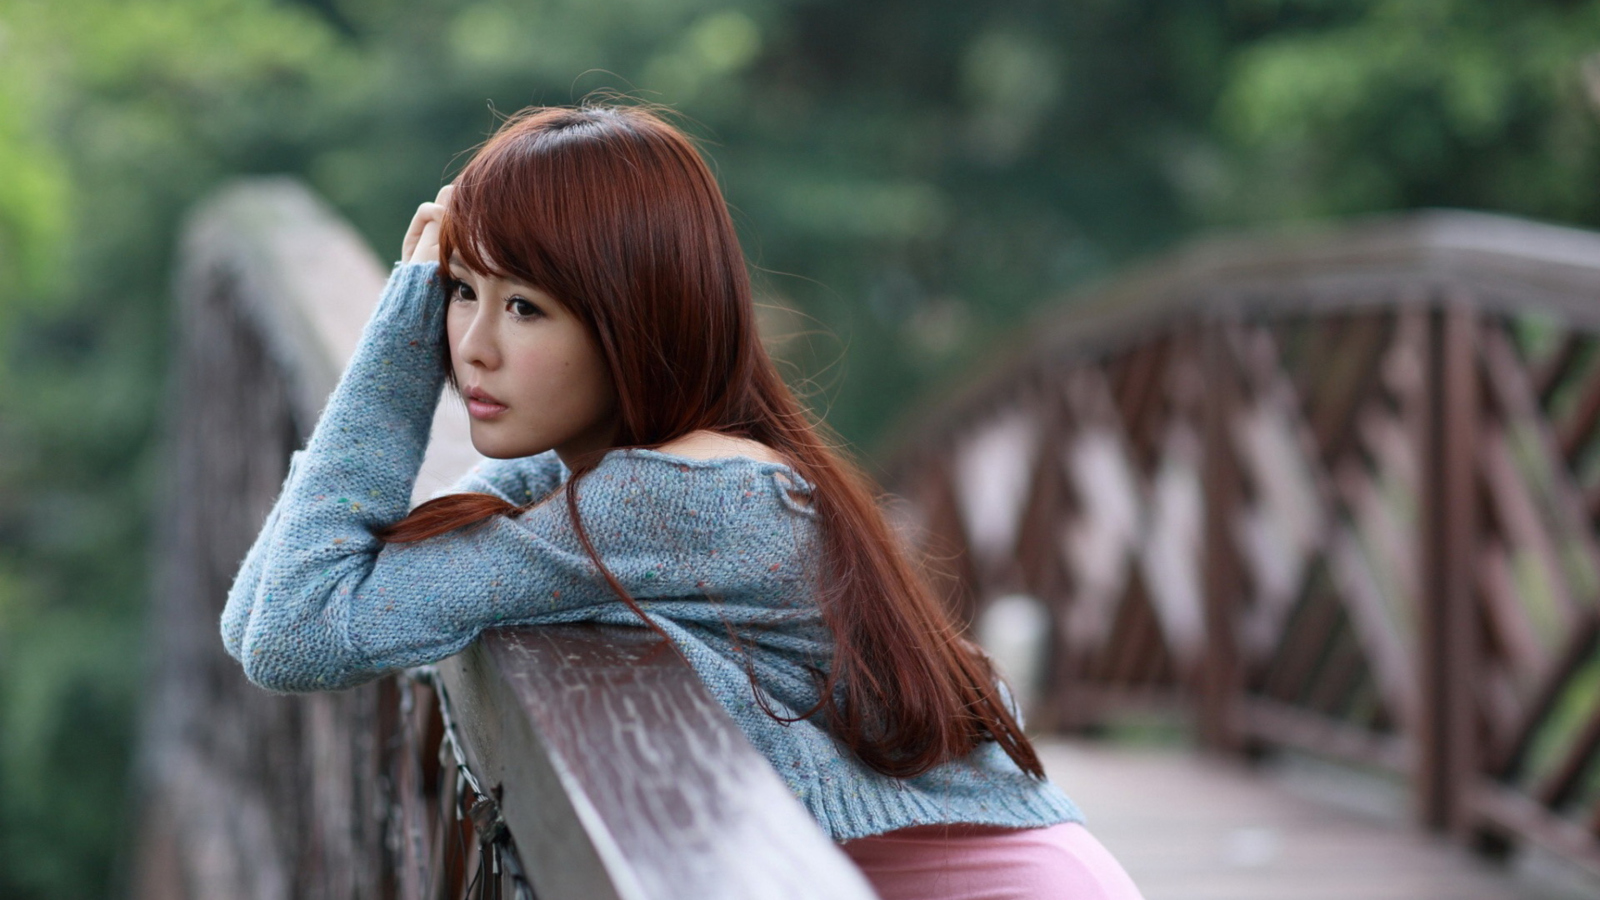 Cute Asian Girl Looking Lonely wallpaper 1600x900